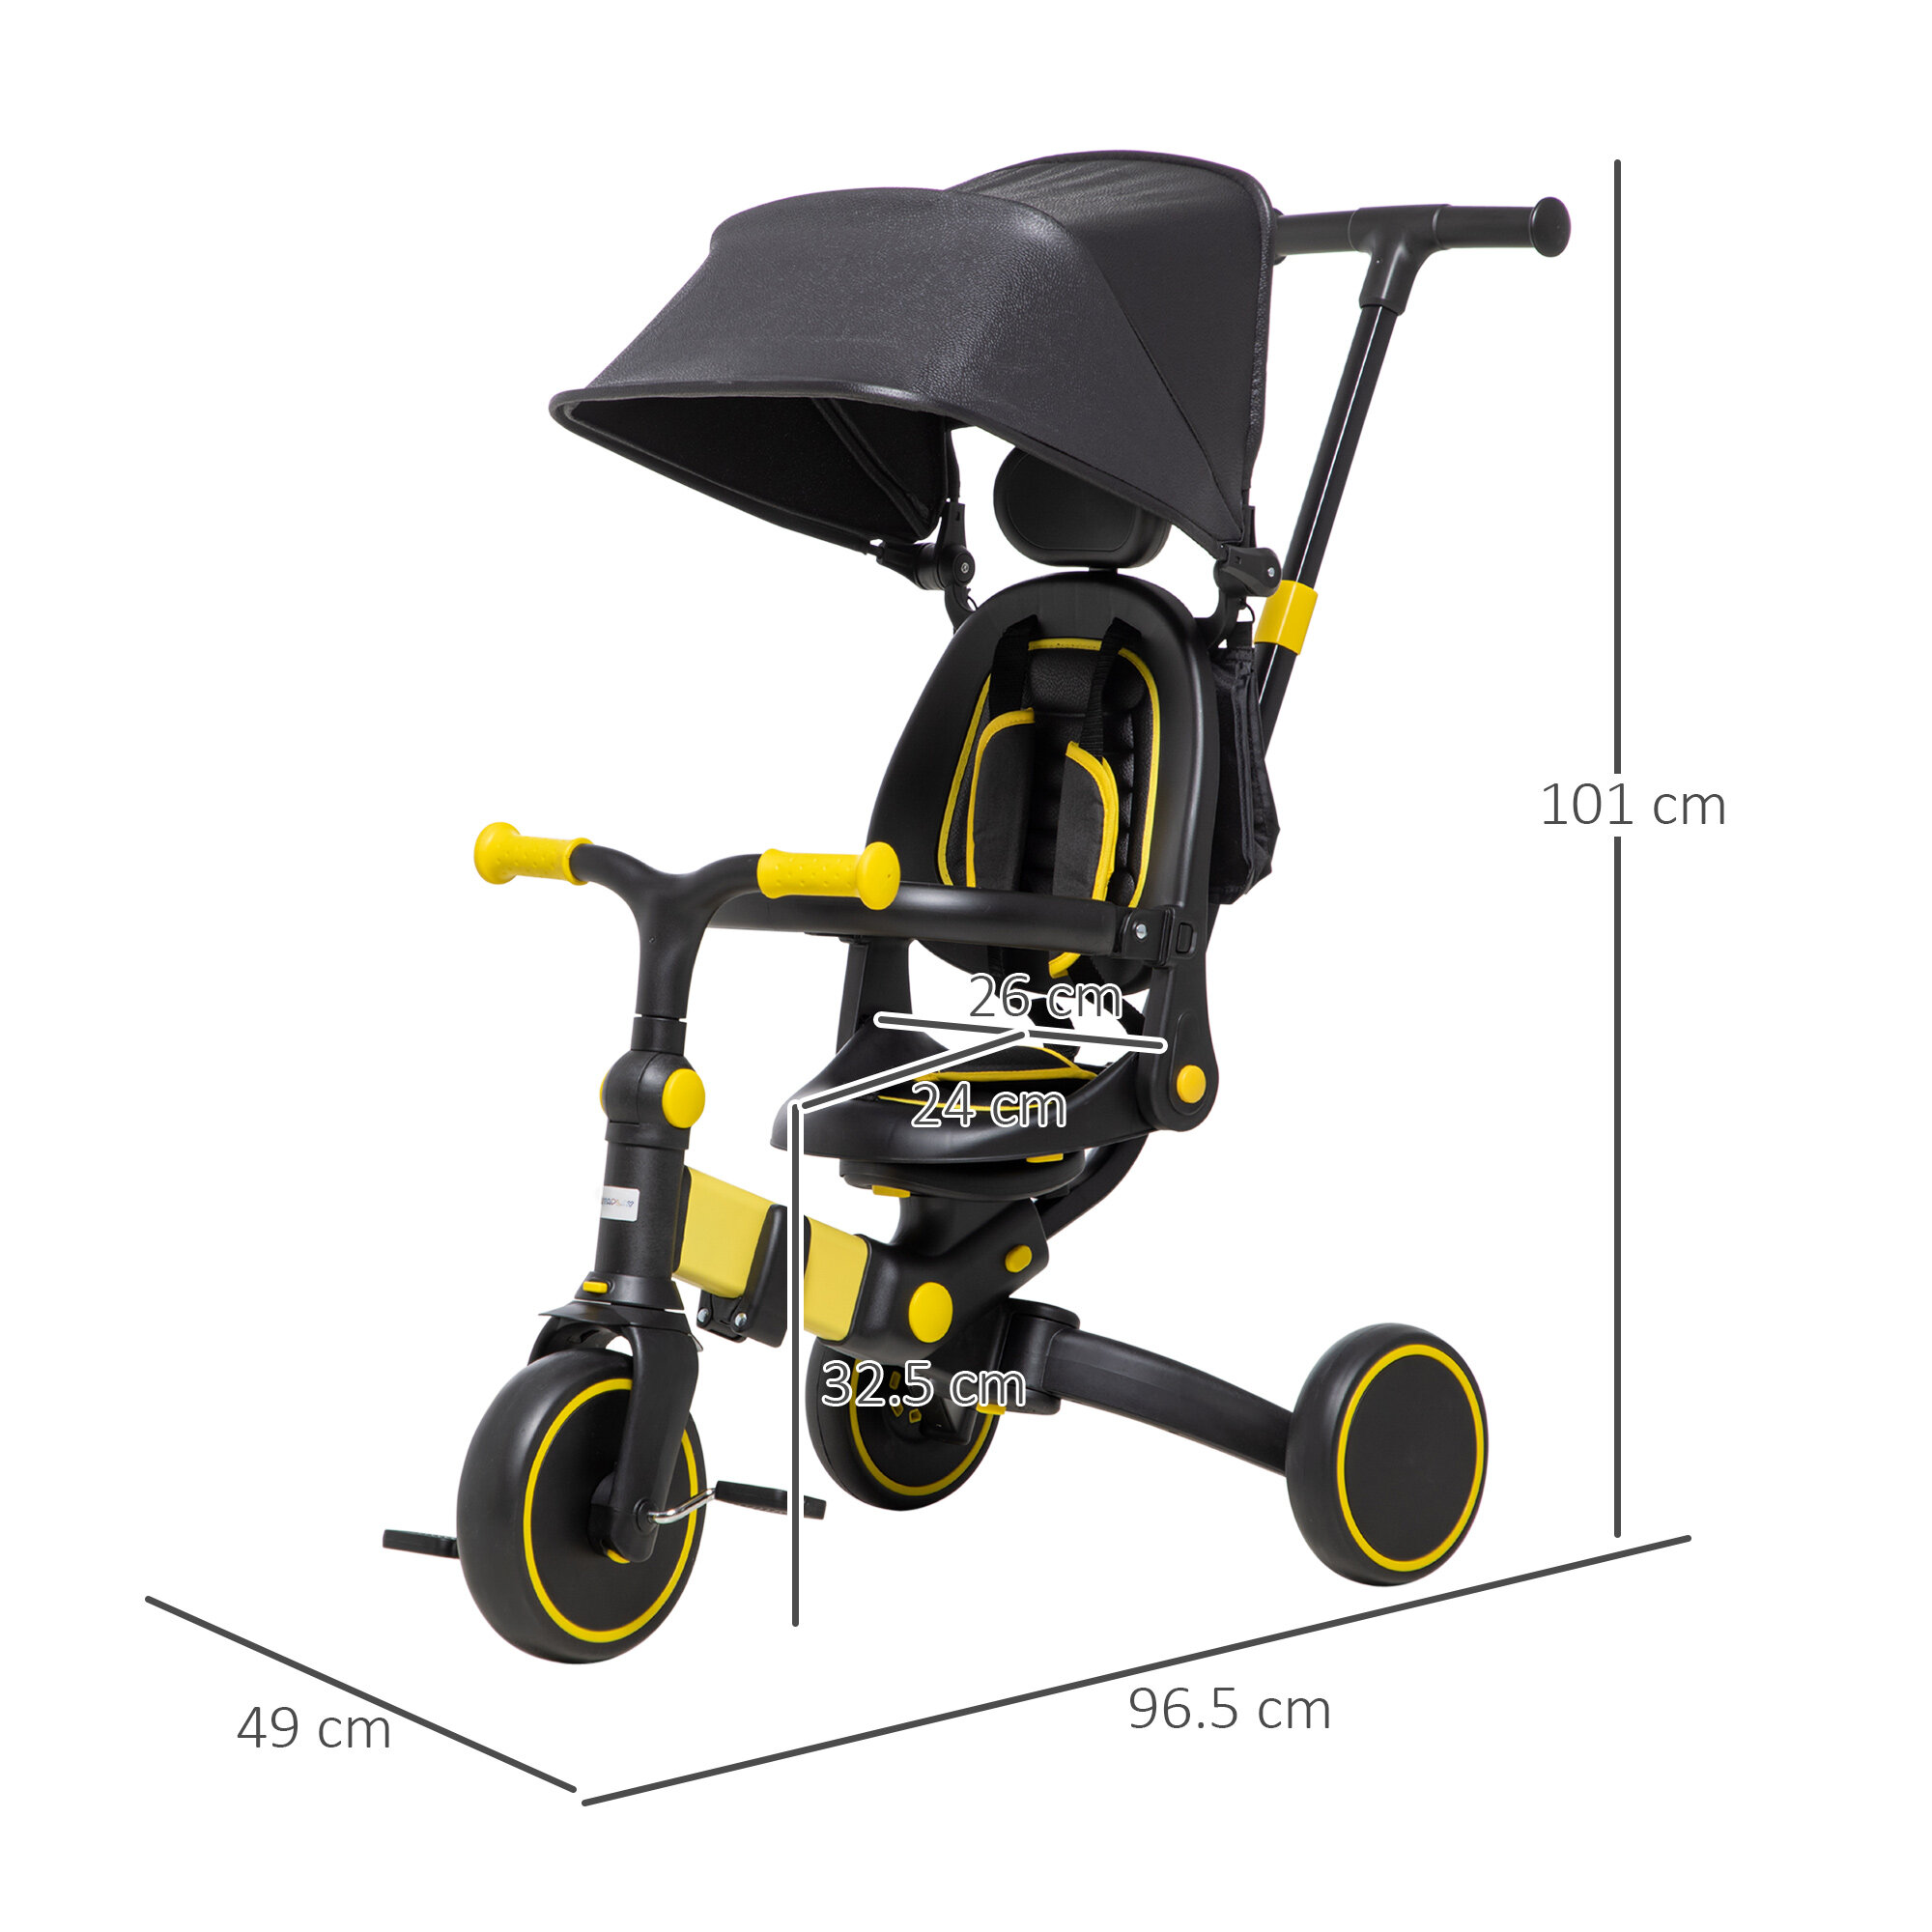 AIYAPLAY 3 in 1 Baby Trike, Tricycle for Kids w/ Adjustable Push Handle - Yellow